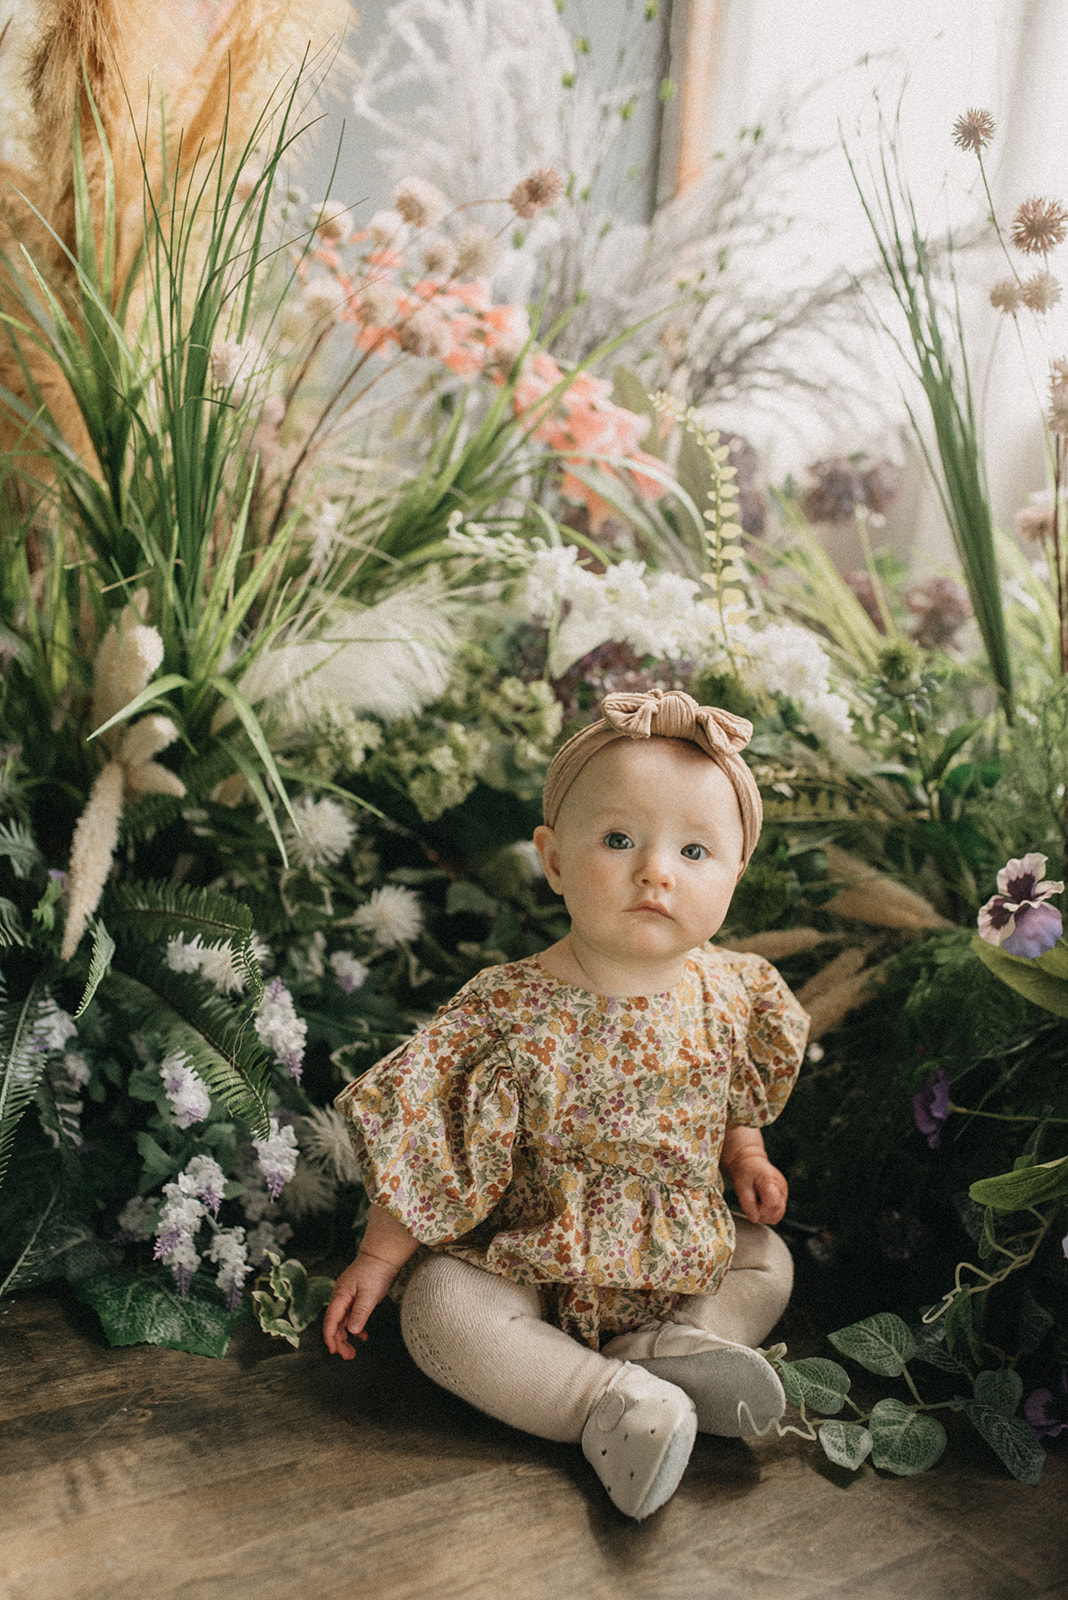 Cute little baby girl in the floral green garden